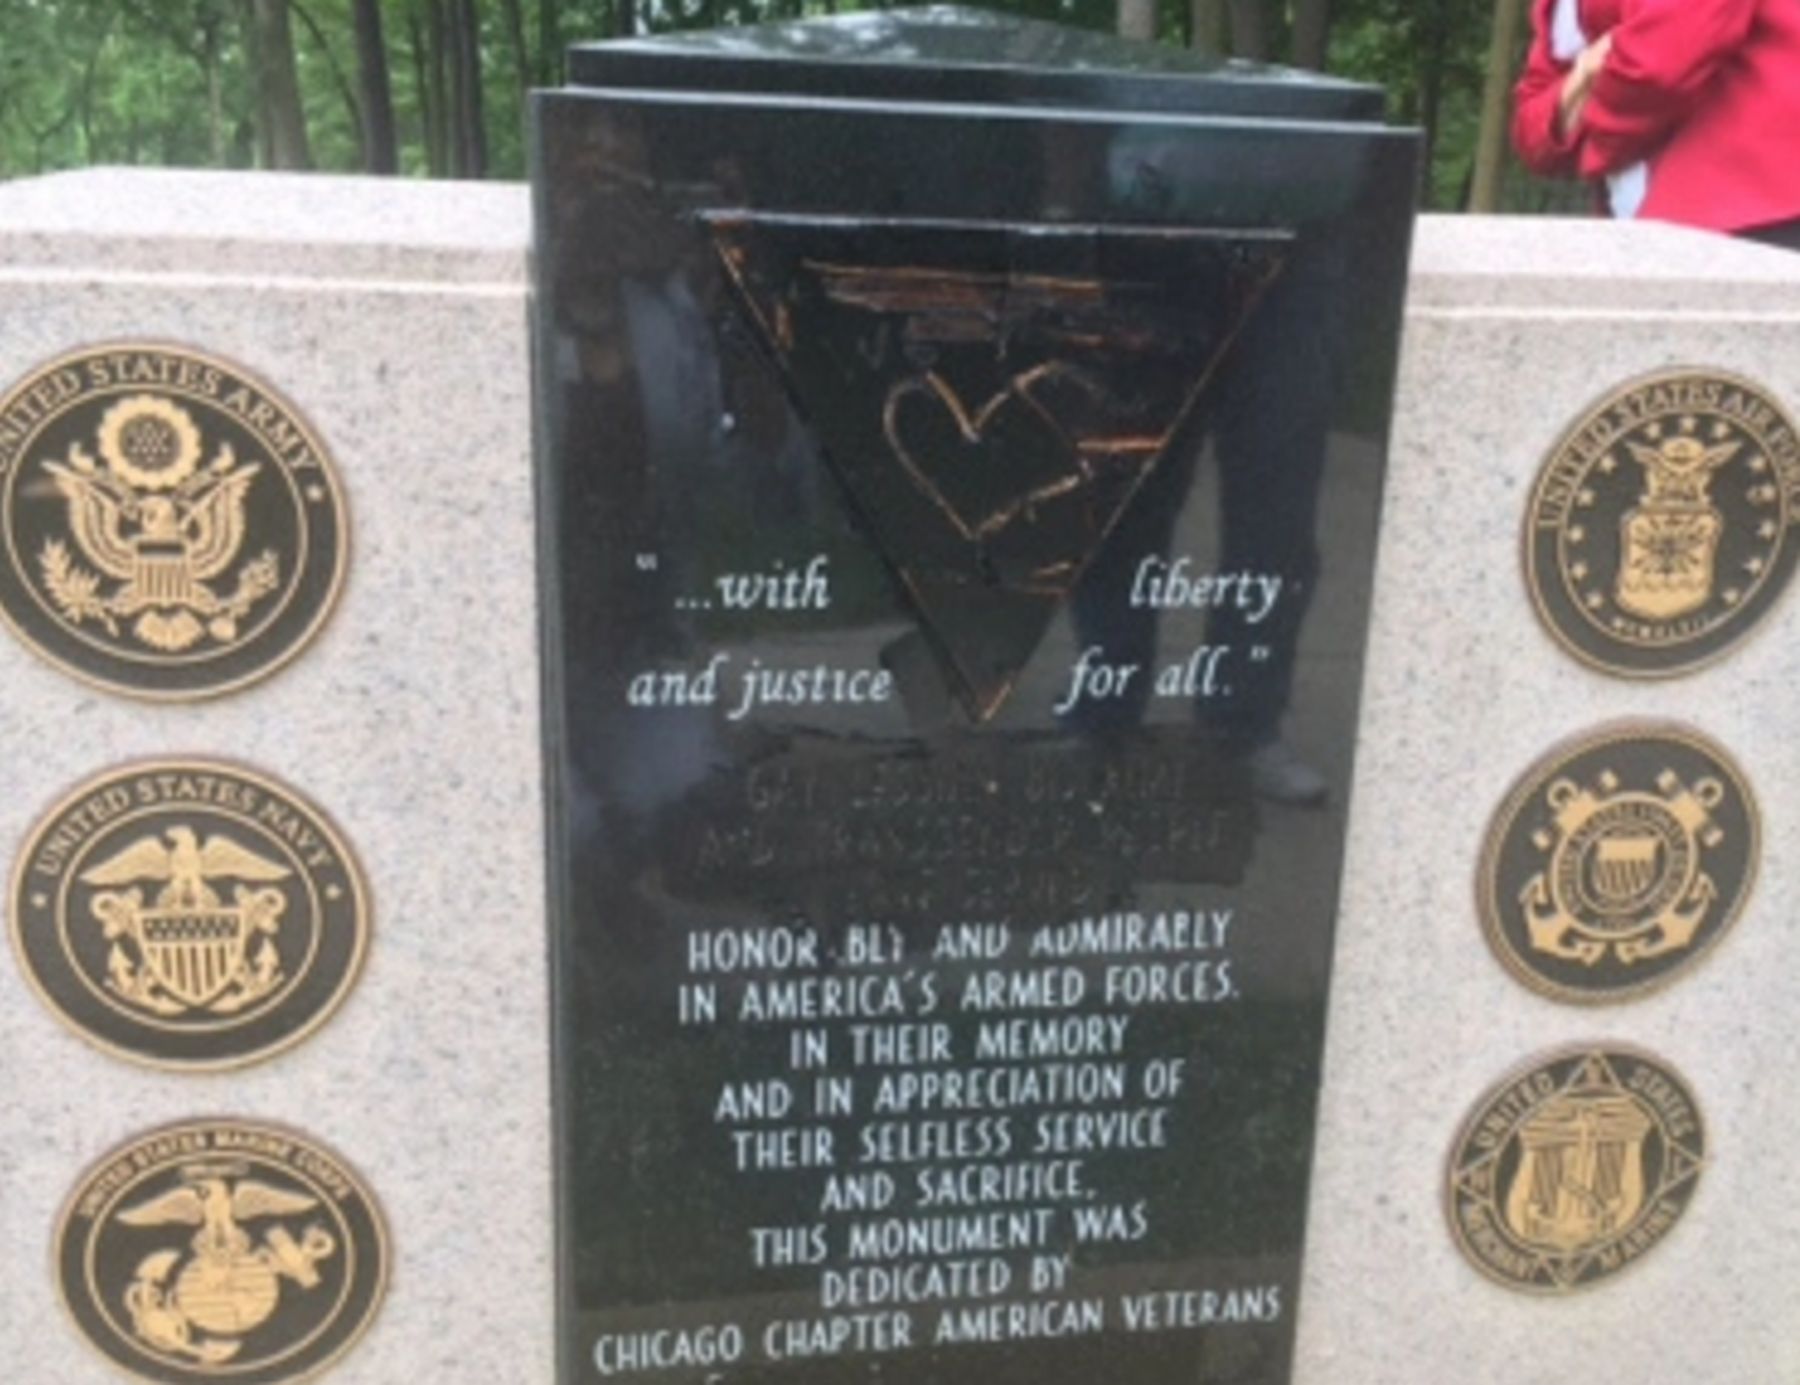 Vandals defaced a monument for LGBT veterans &#038; only the American Legion cares